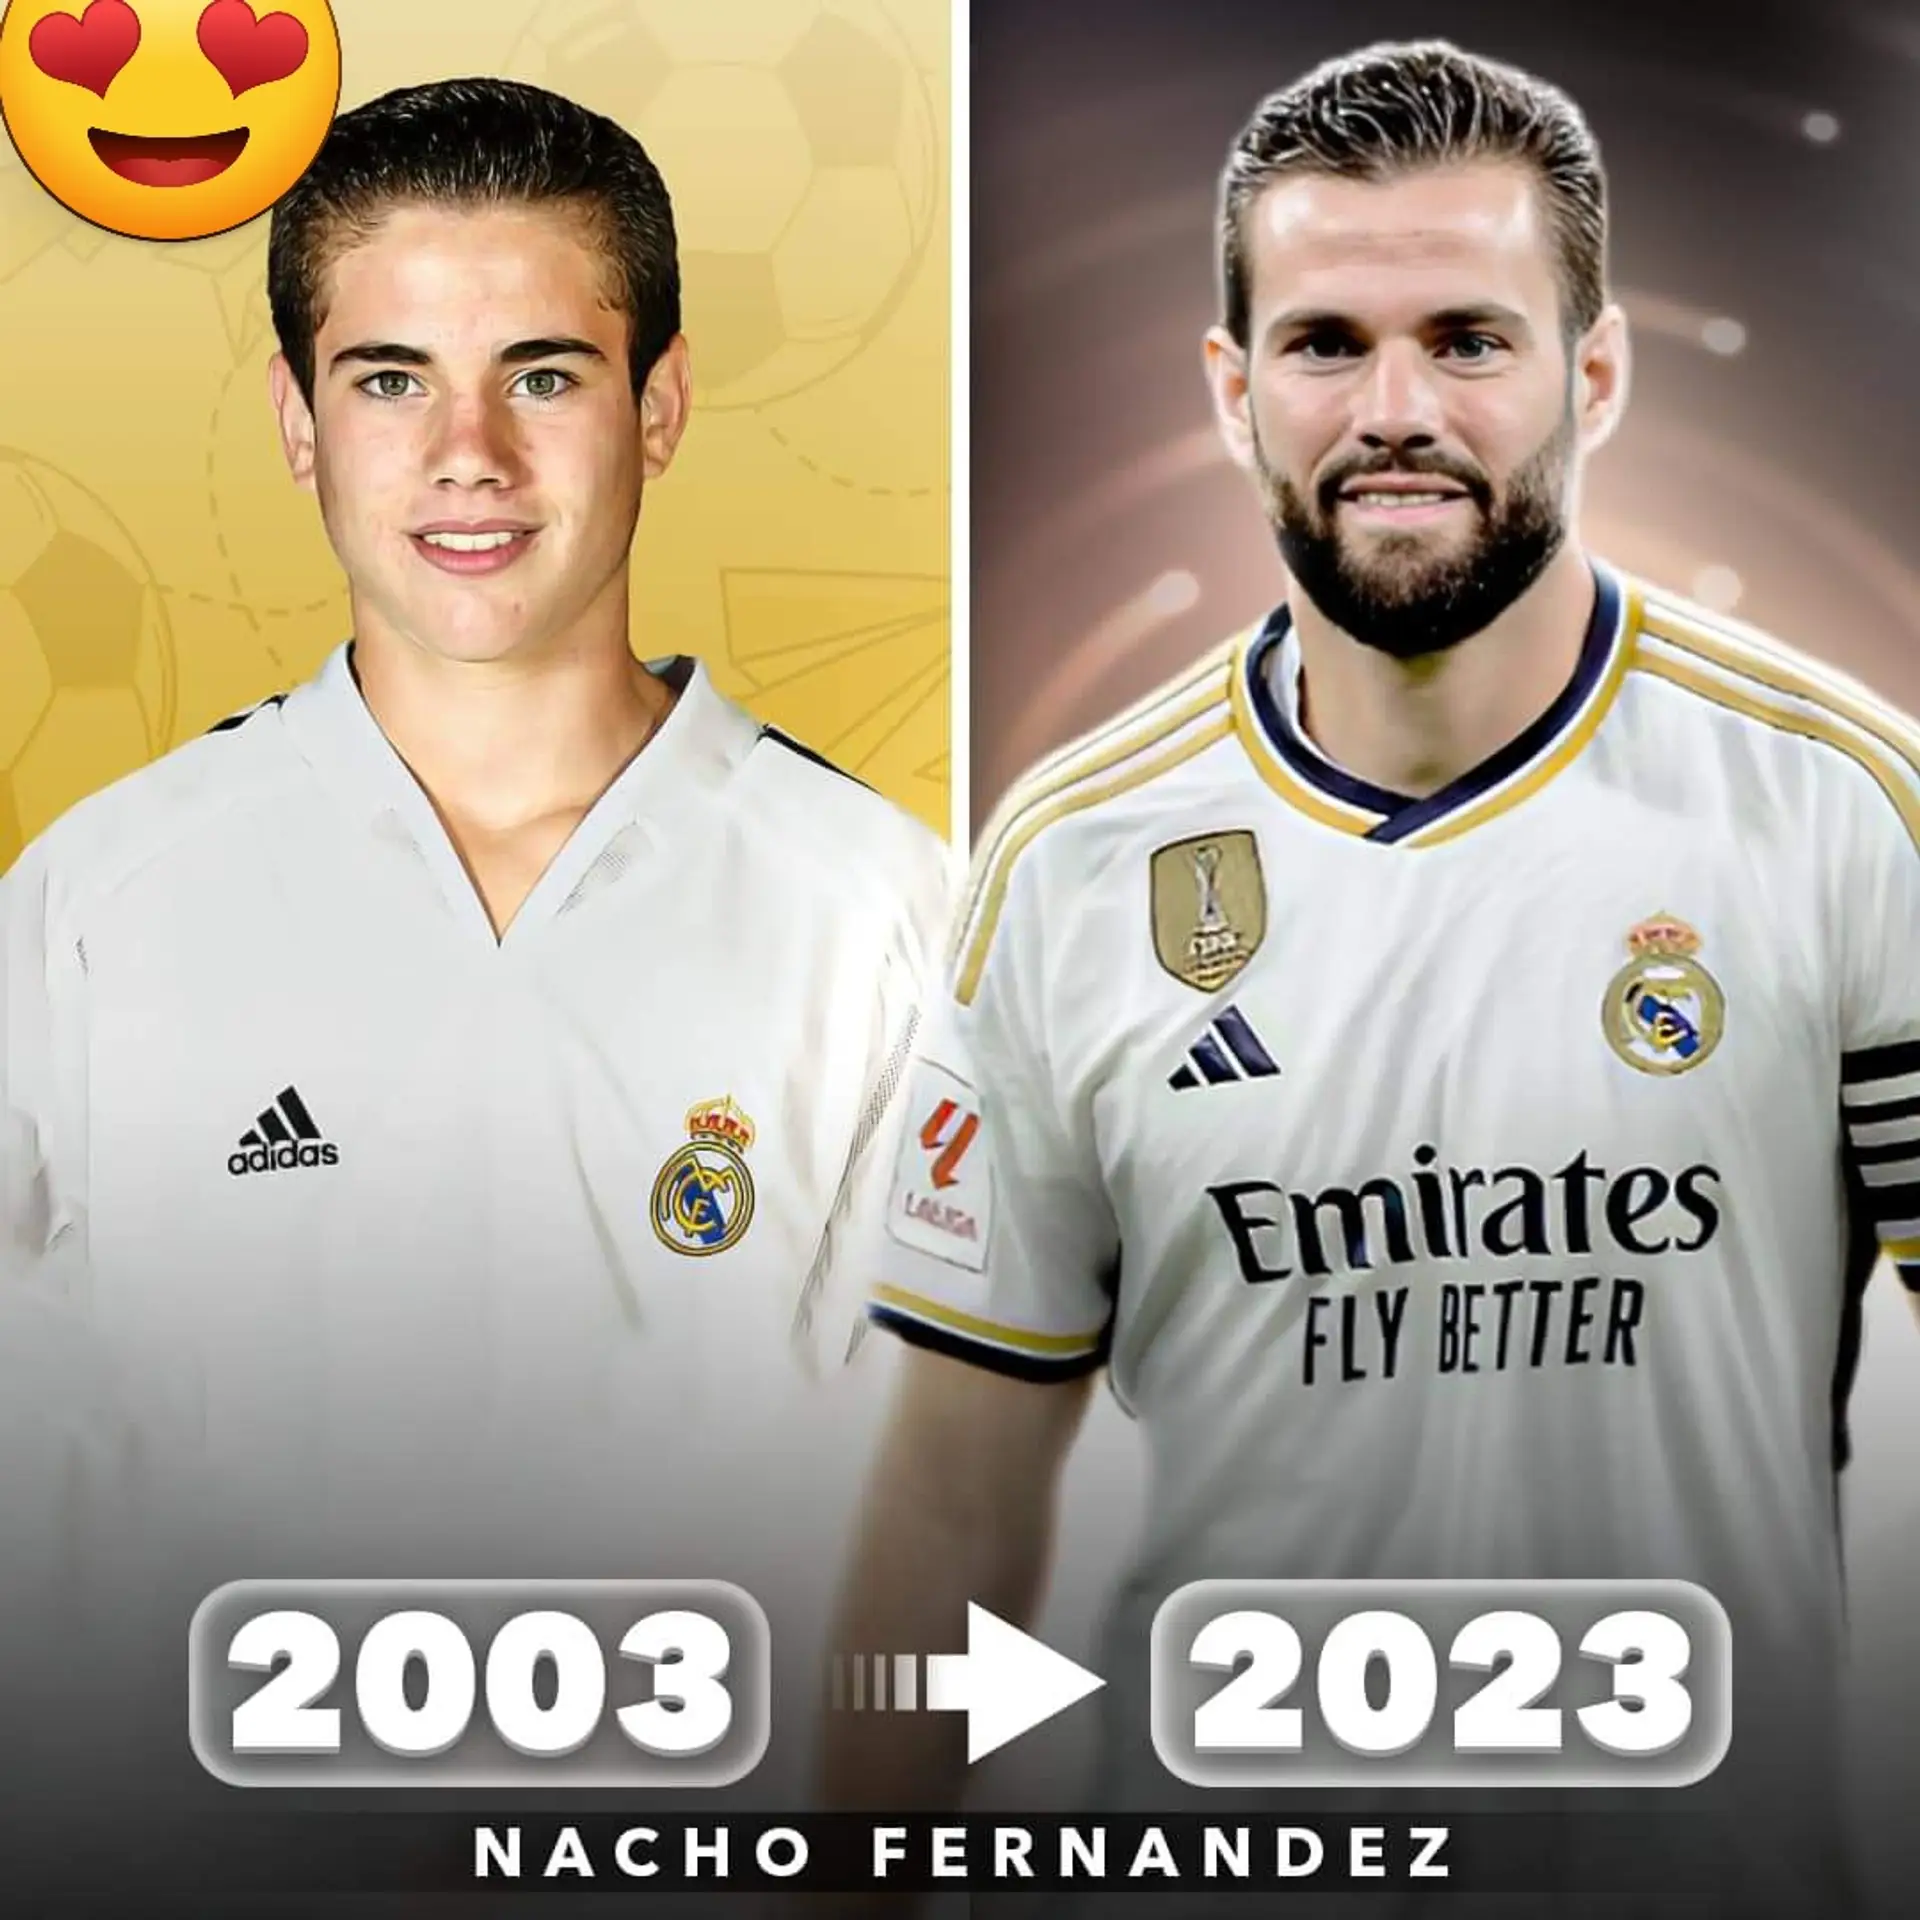 The only CLUB 33-years-old Nacho Fernández has ever played for is REAL MADRID 🤯👏